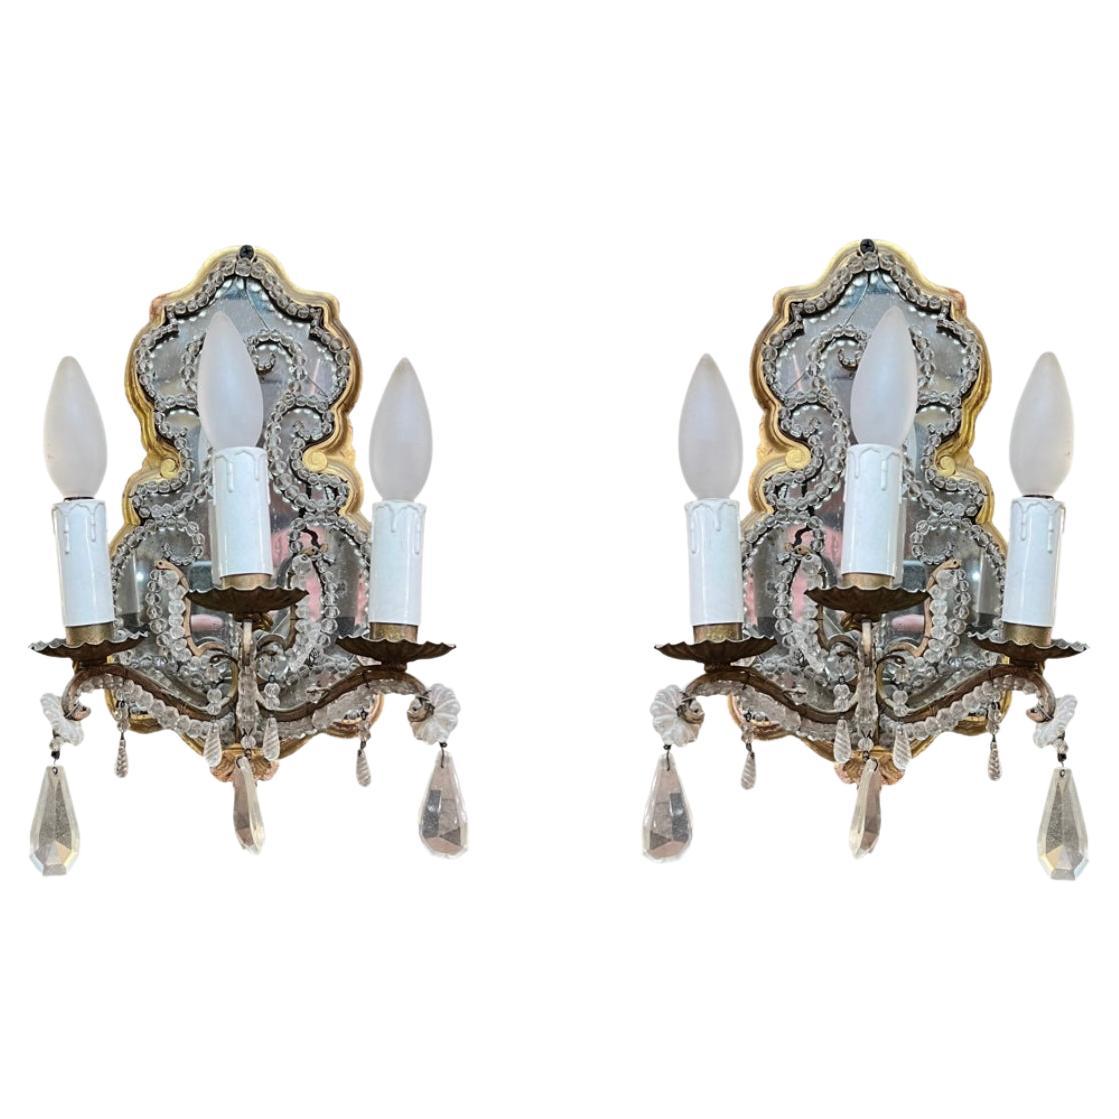 Pair 19th Century French Gilt Metal Mounted Mirrored Giltwood Sconces